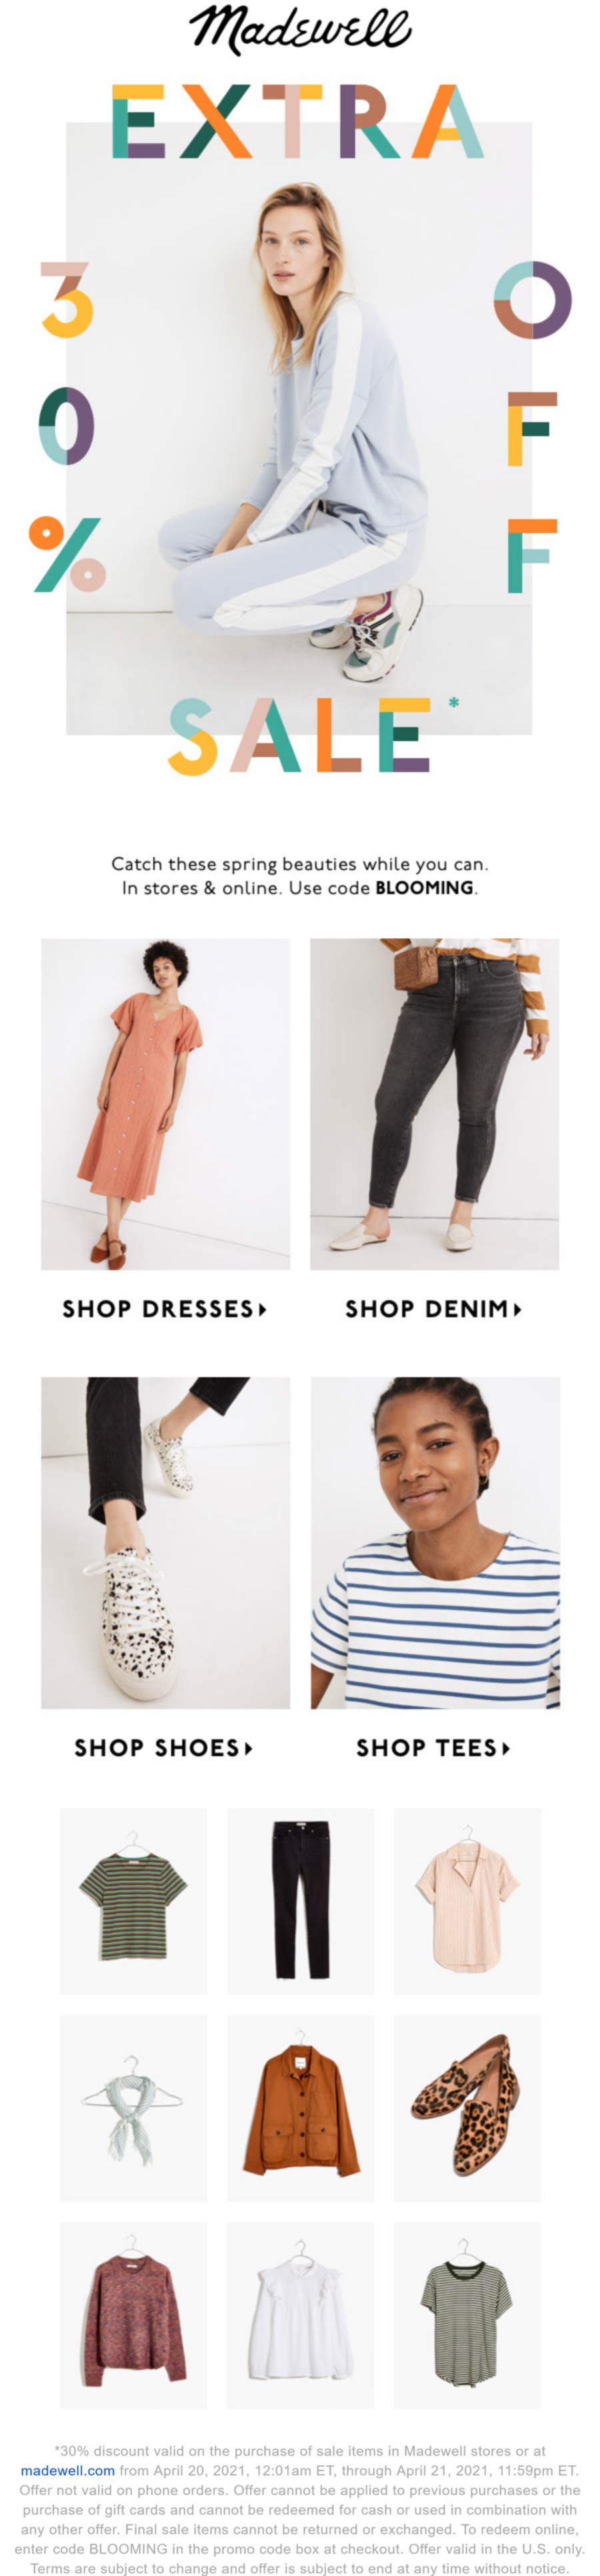 Madewell stores Coupon  Extra 30% off at Madewell, or online via promo code BLOOMING #madewell 